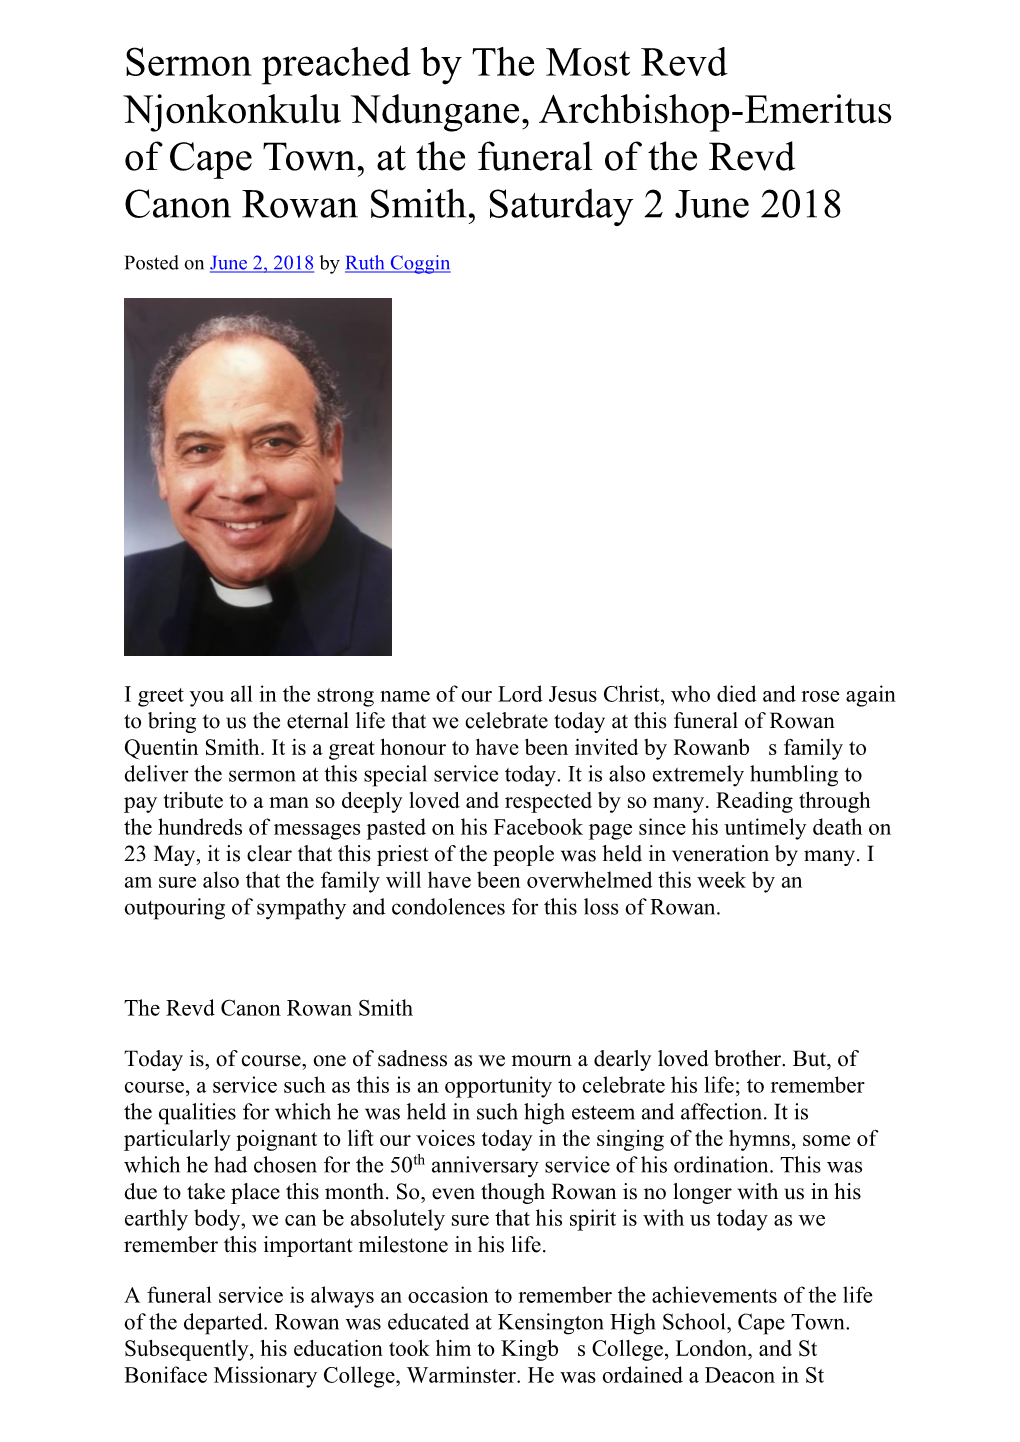 Sermon Preached by the Most Revd Njonkonkulu Ndungane, Archbishop-Emeritus of Cape Town, at the Funeral of the Revd Canon Rowan Smith, Saturday 2 June 2018